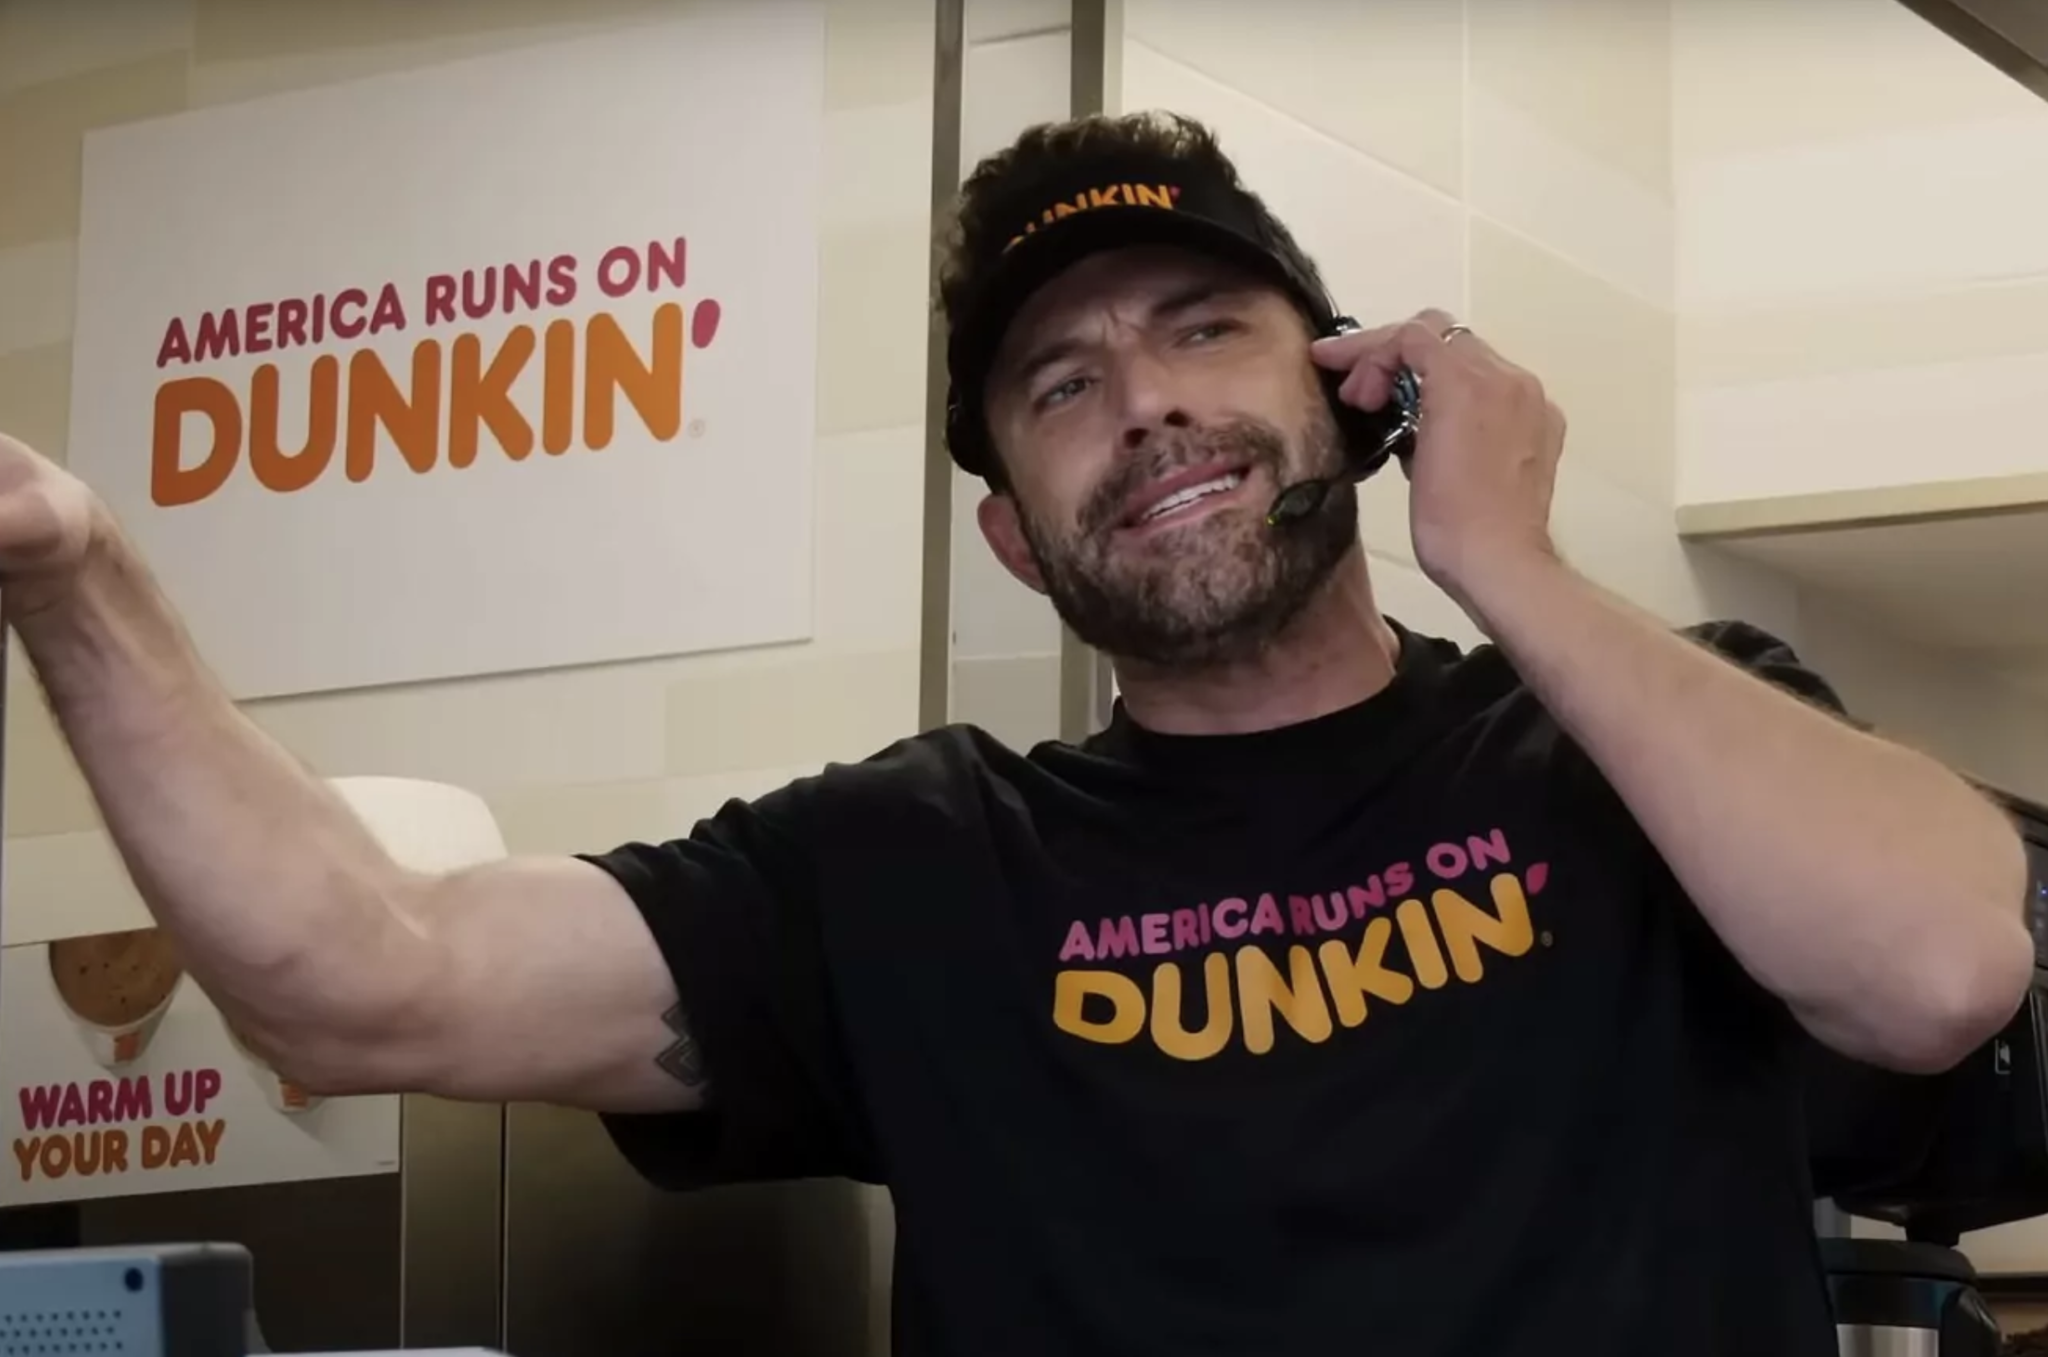 Ben Affleck swaps Jennifer Lopez for Ice Spice in latest Dunkin Donuts commercial